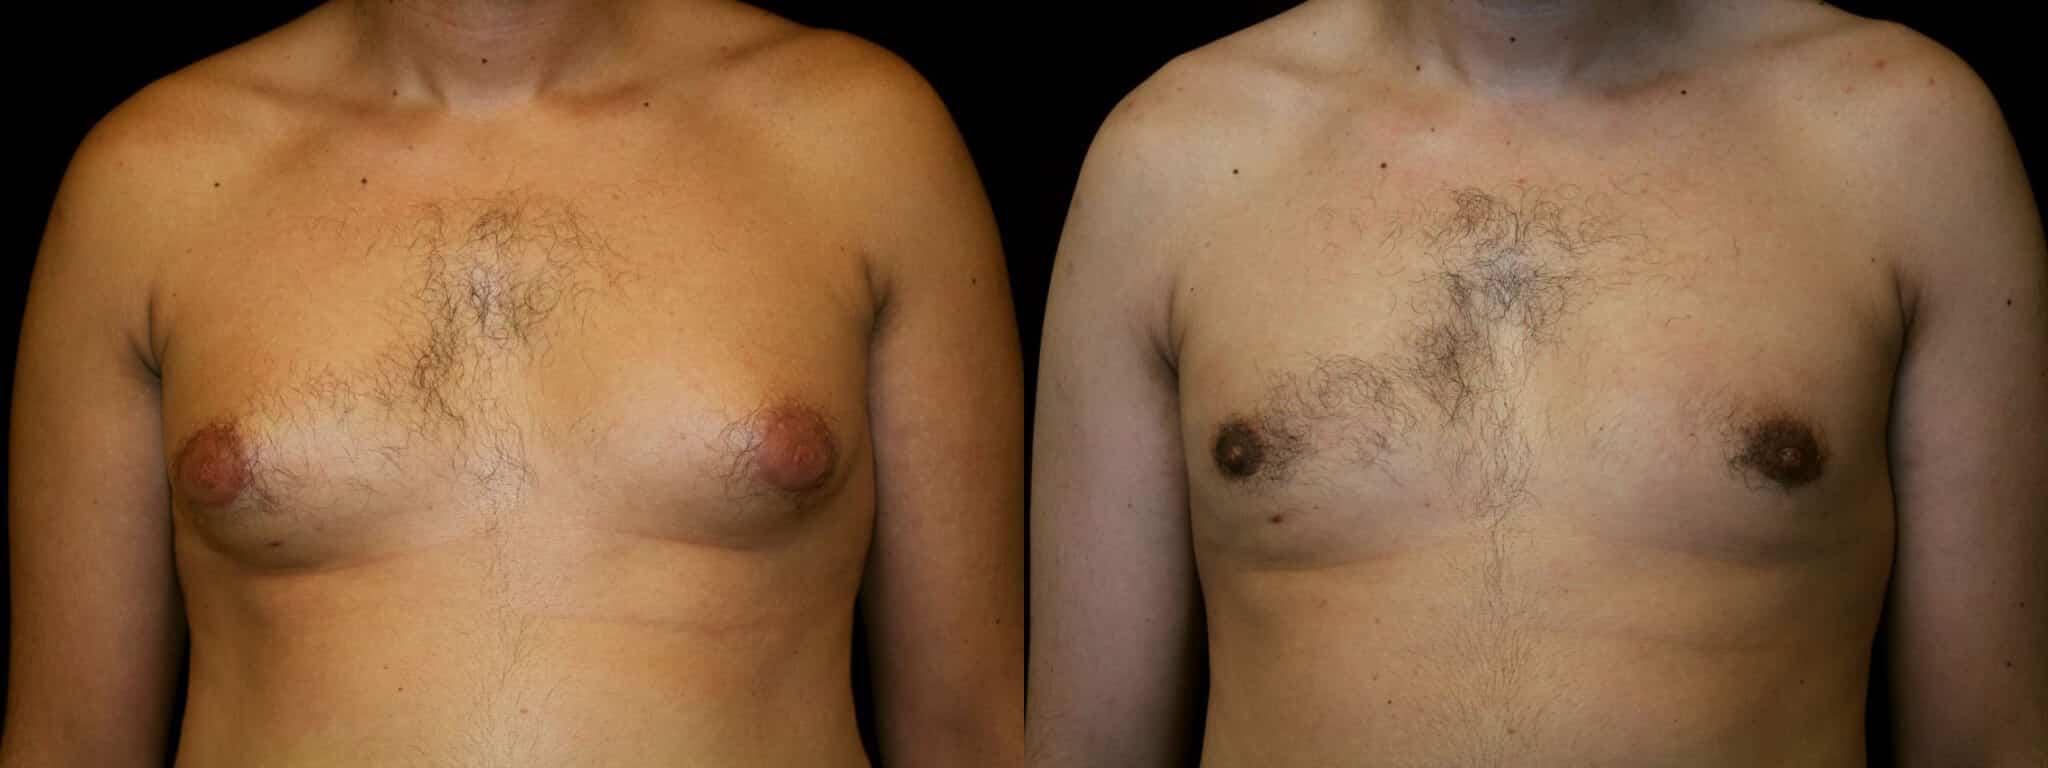 Gynecomastia Patient 7 Before & After